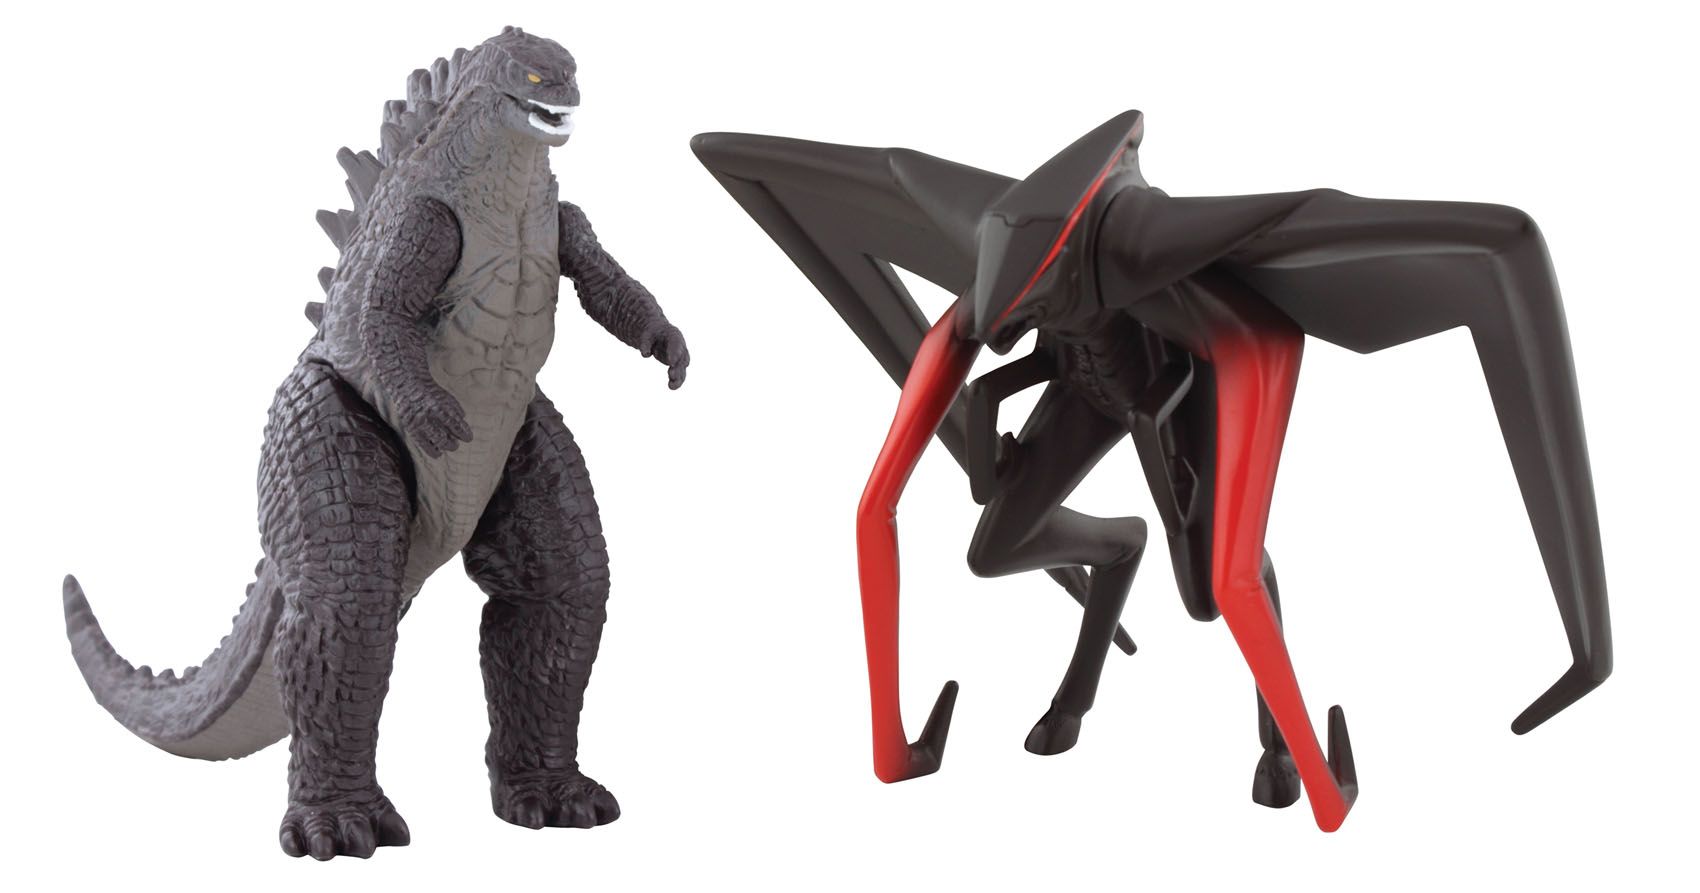 Godzilla Toys Offer First Look at Muto Monster